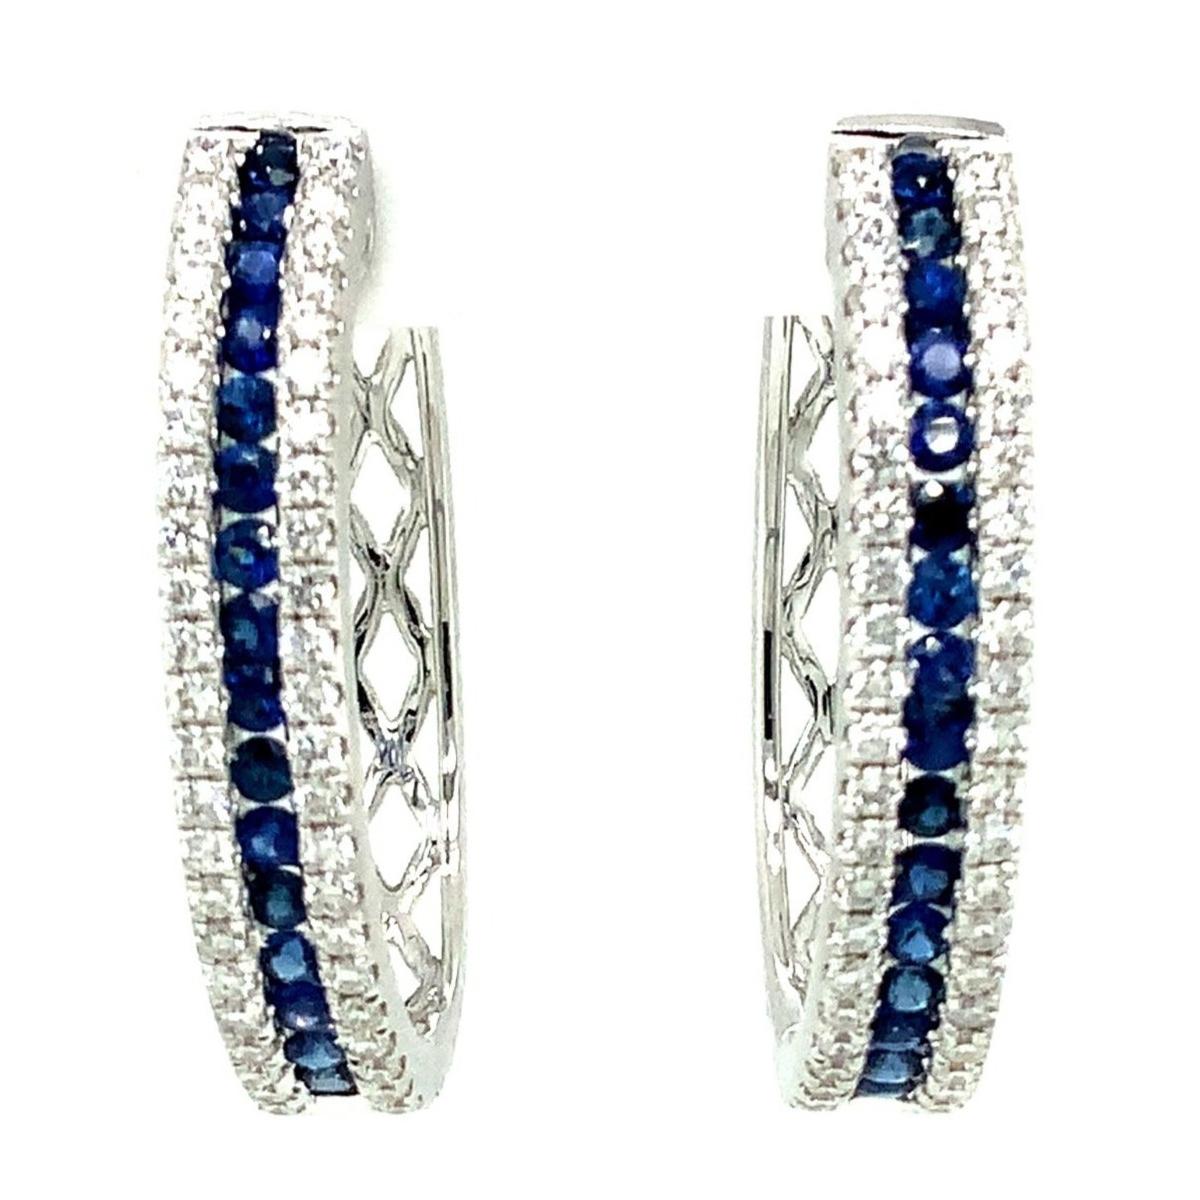 Afarin Collection Blue Sapphire and Diamond Oval Shaped Hoop Earring set in 18K White Gold.  These straight-line designed earrings feature this row of intense Blue Sapphires that are flanked by diamonds.
32 Round Brilliant Cut Natural Blue Sapphire